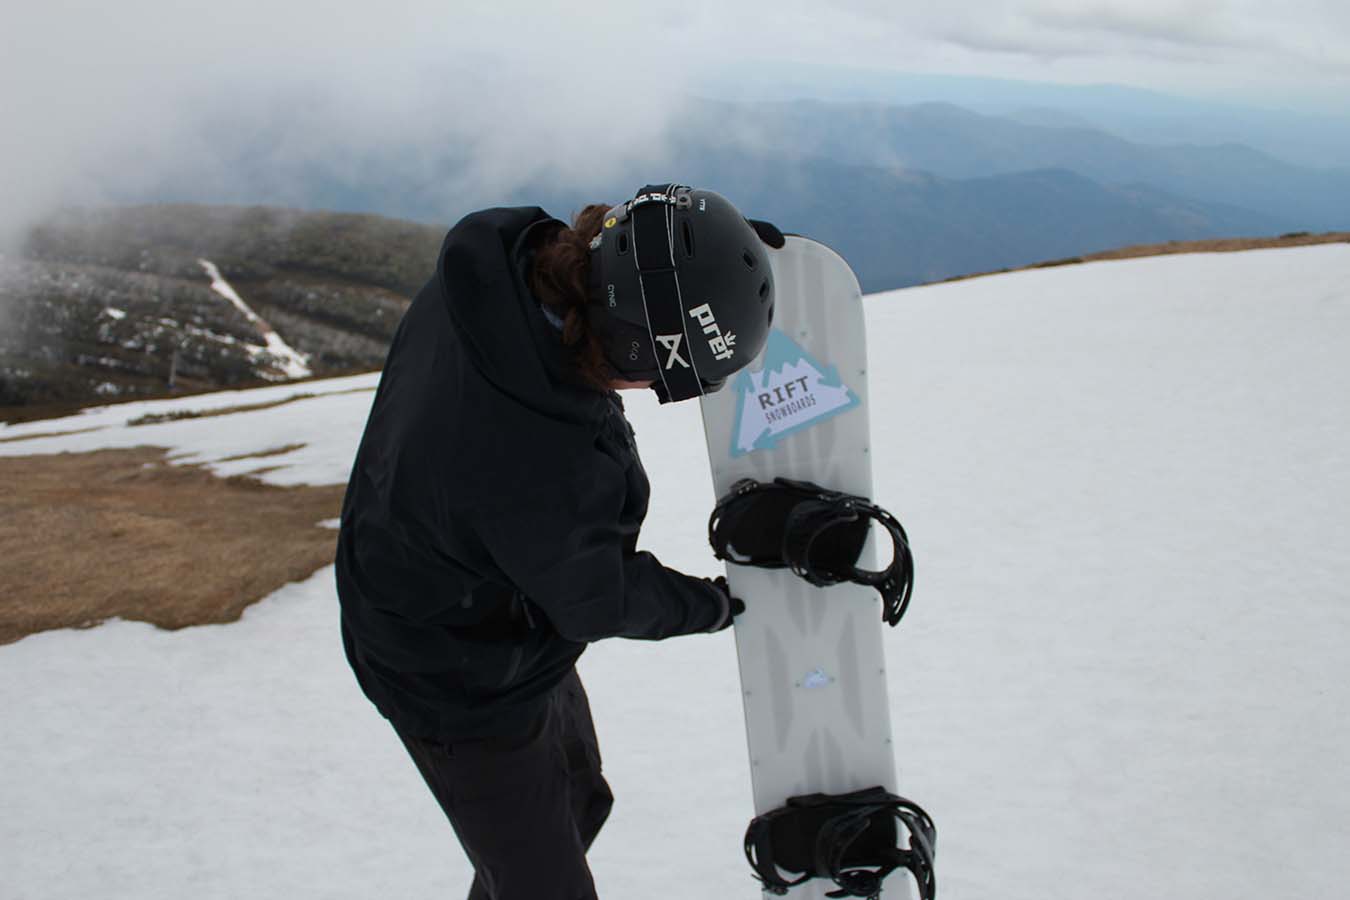 User inspecting snowboard before testing.